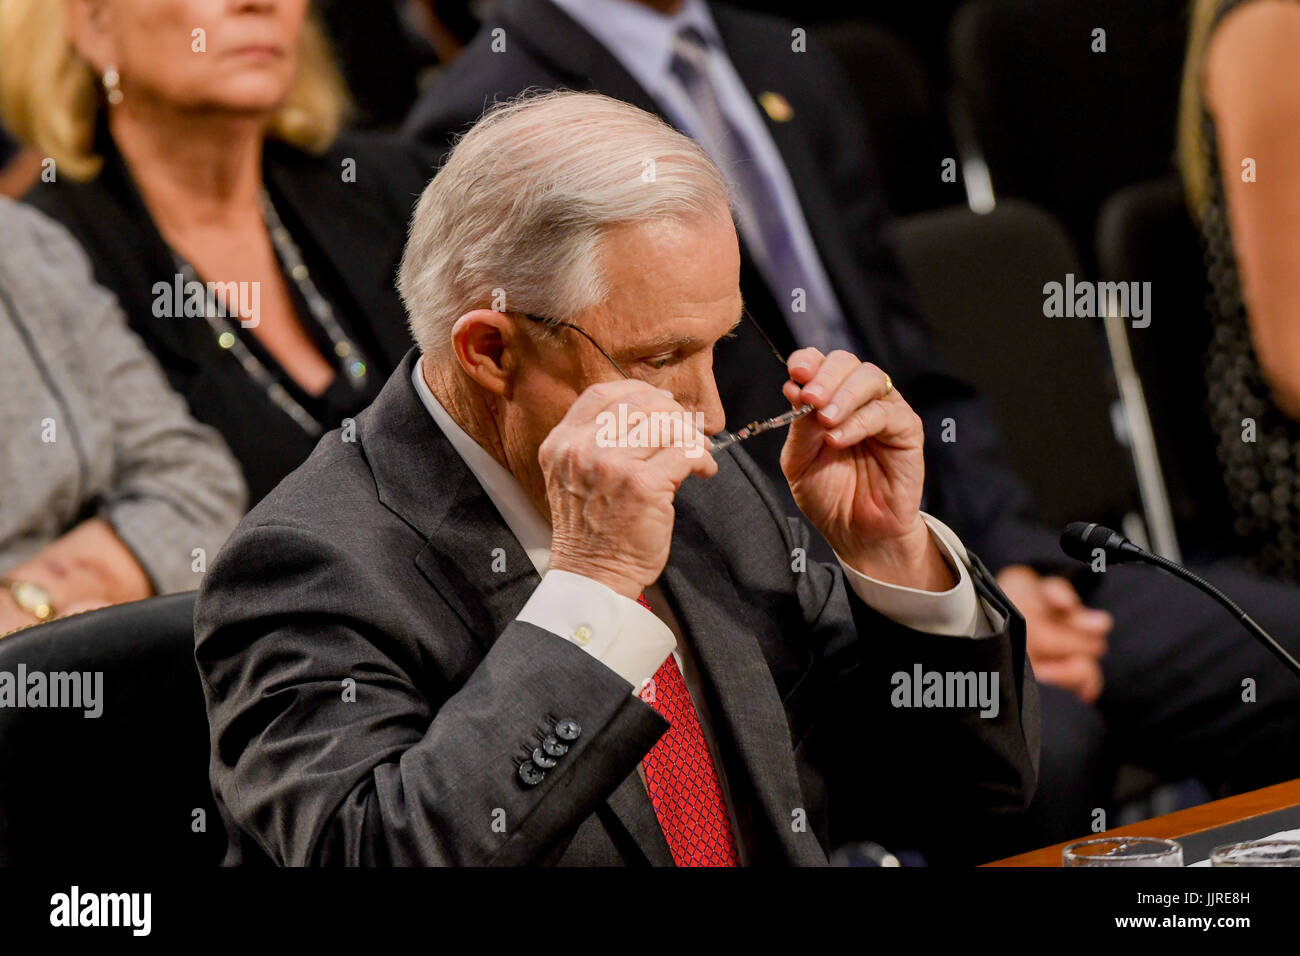 US. Attorney General Jeff Sessions removes his reading glasses after reading his prepared opening statements at the start of his testimony in front of the Senate Intelligence  Committee. Washington DC, June 13, 2017. Stock Photo